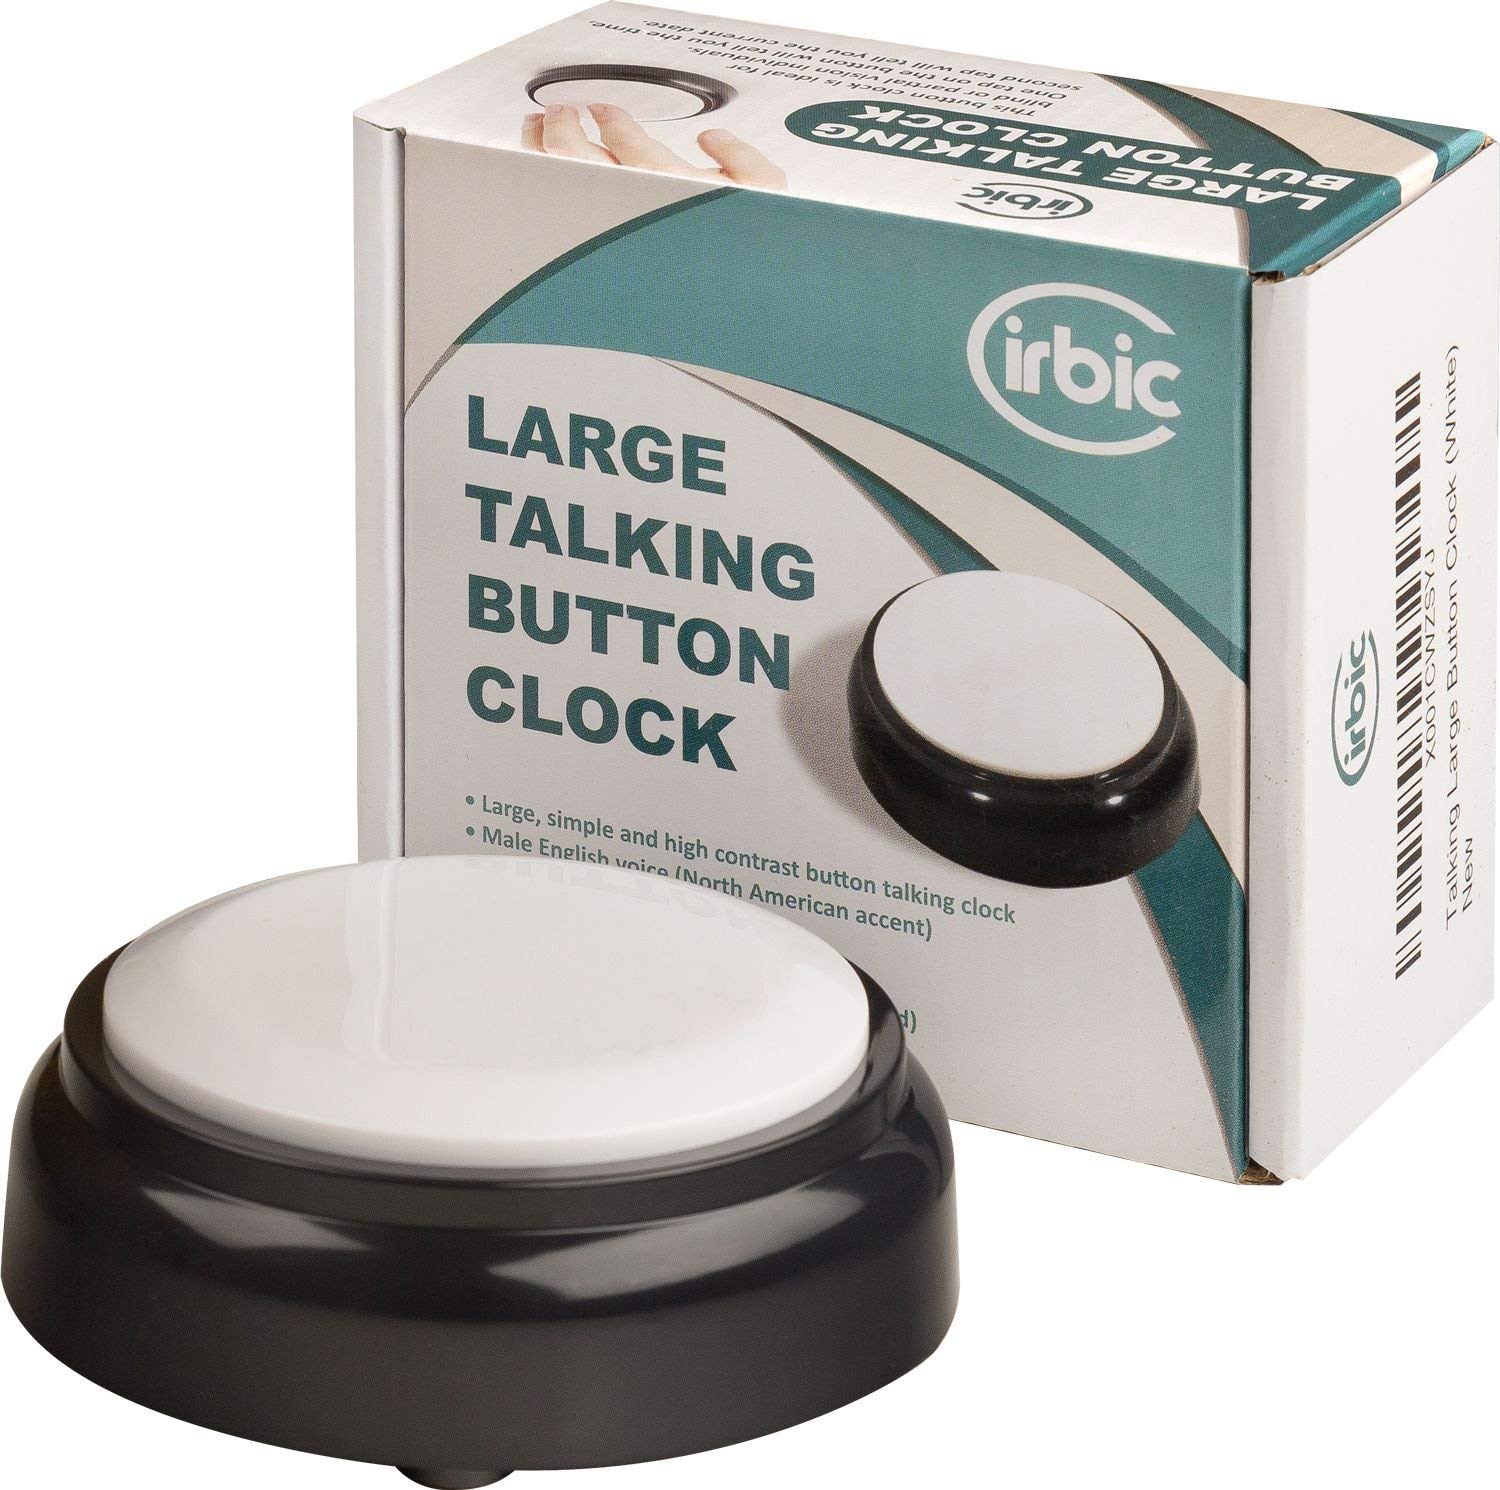 Elderly or Visually impaired Extra Large Talking Button Clock for The Blind 